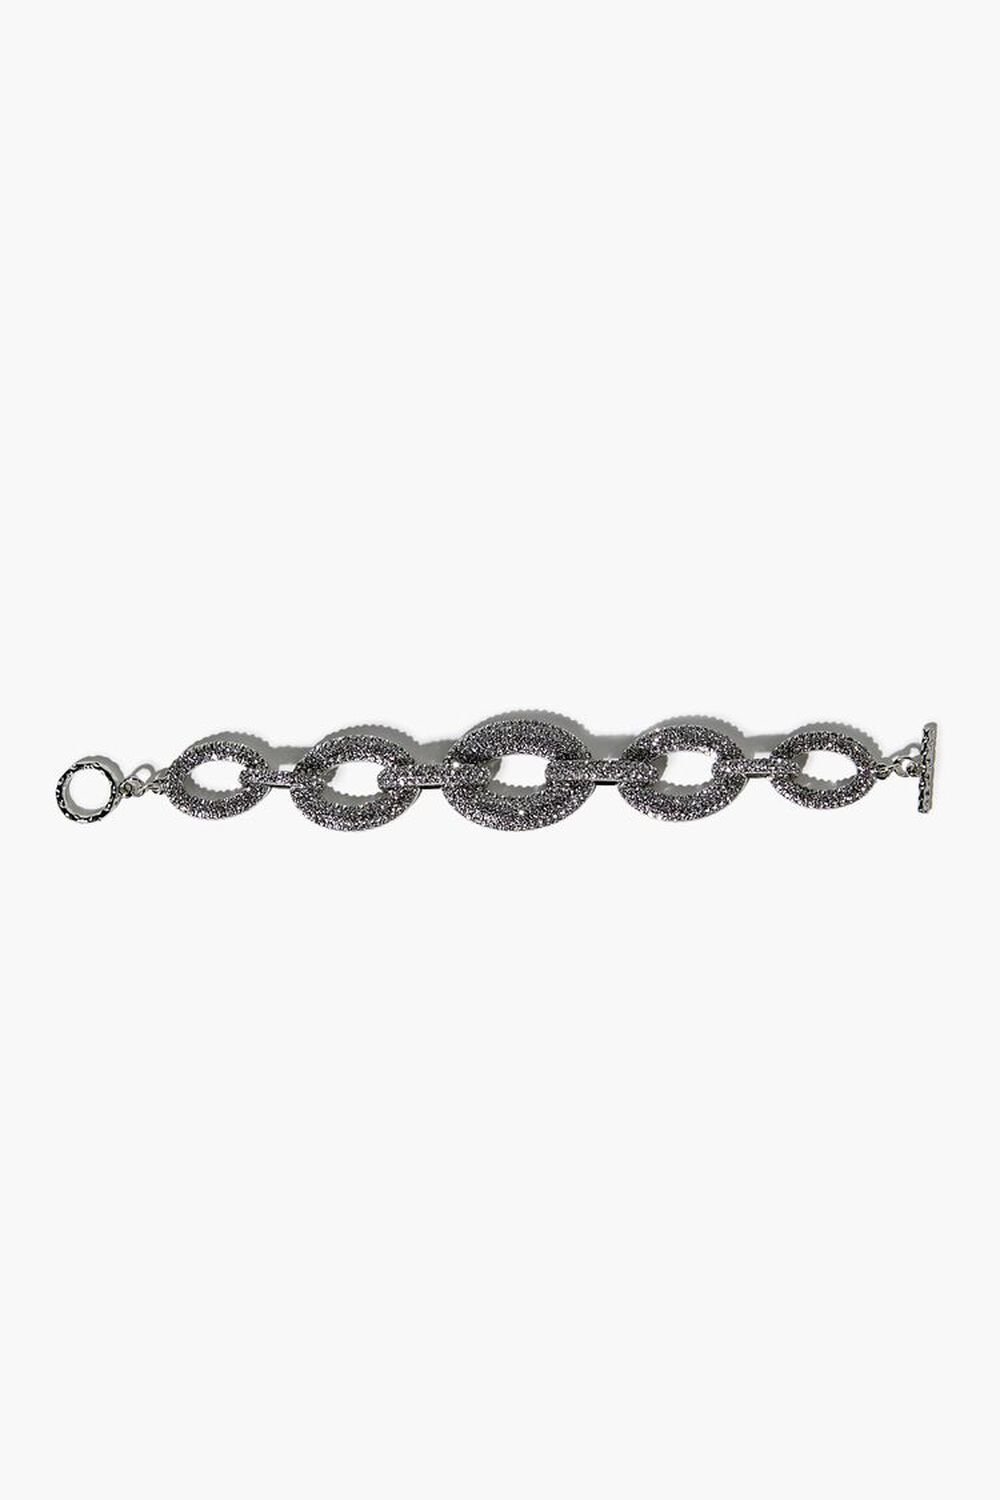 SILVER Rhinestone Chunky Cable Chain Bracelet, image 1